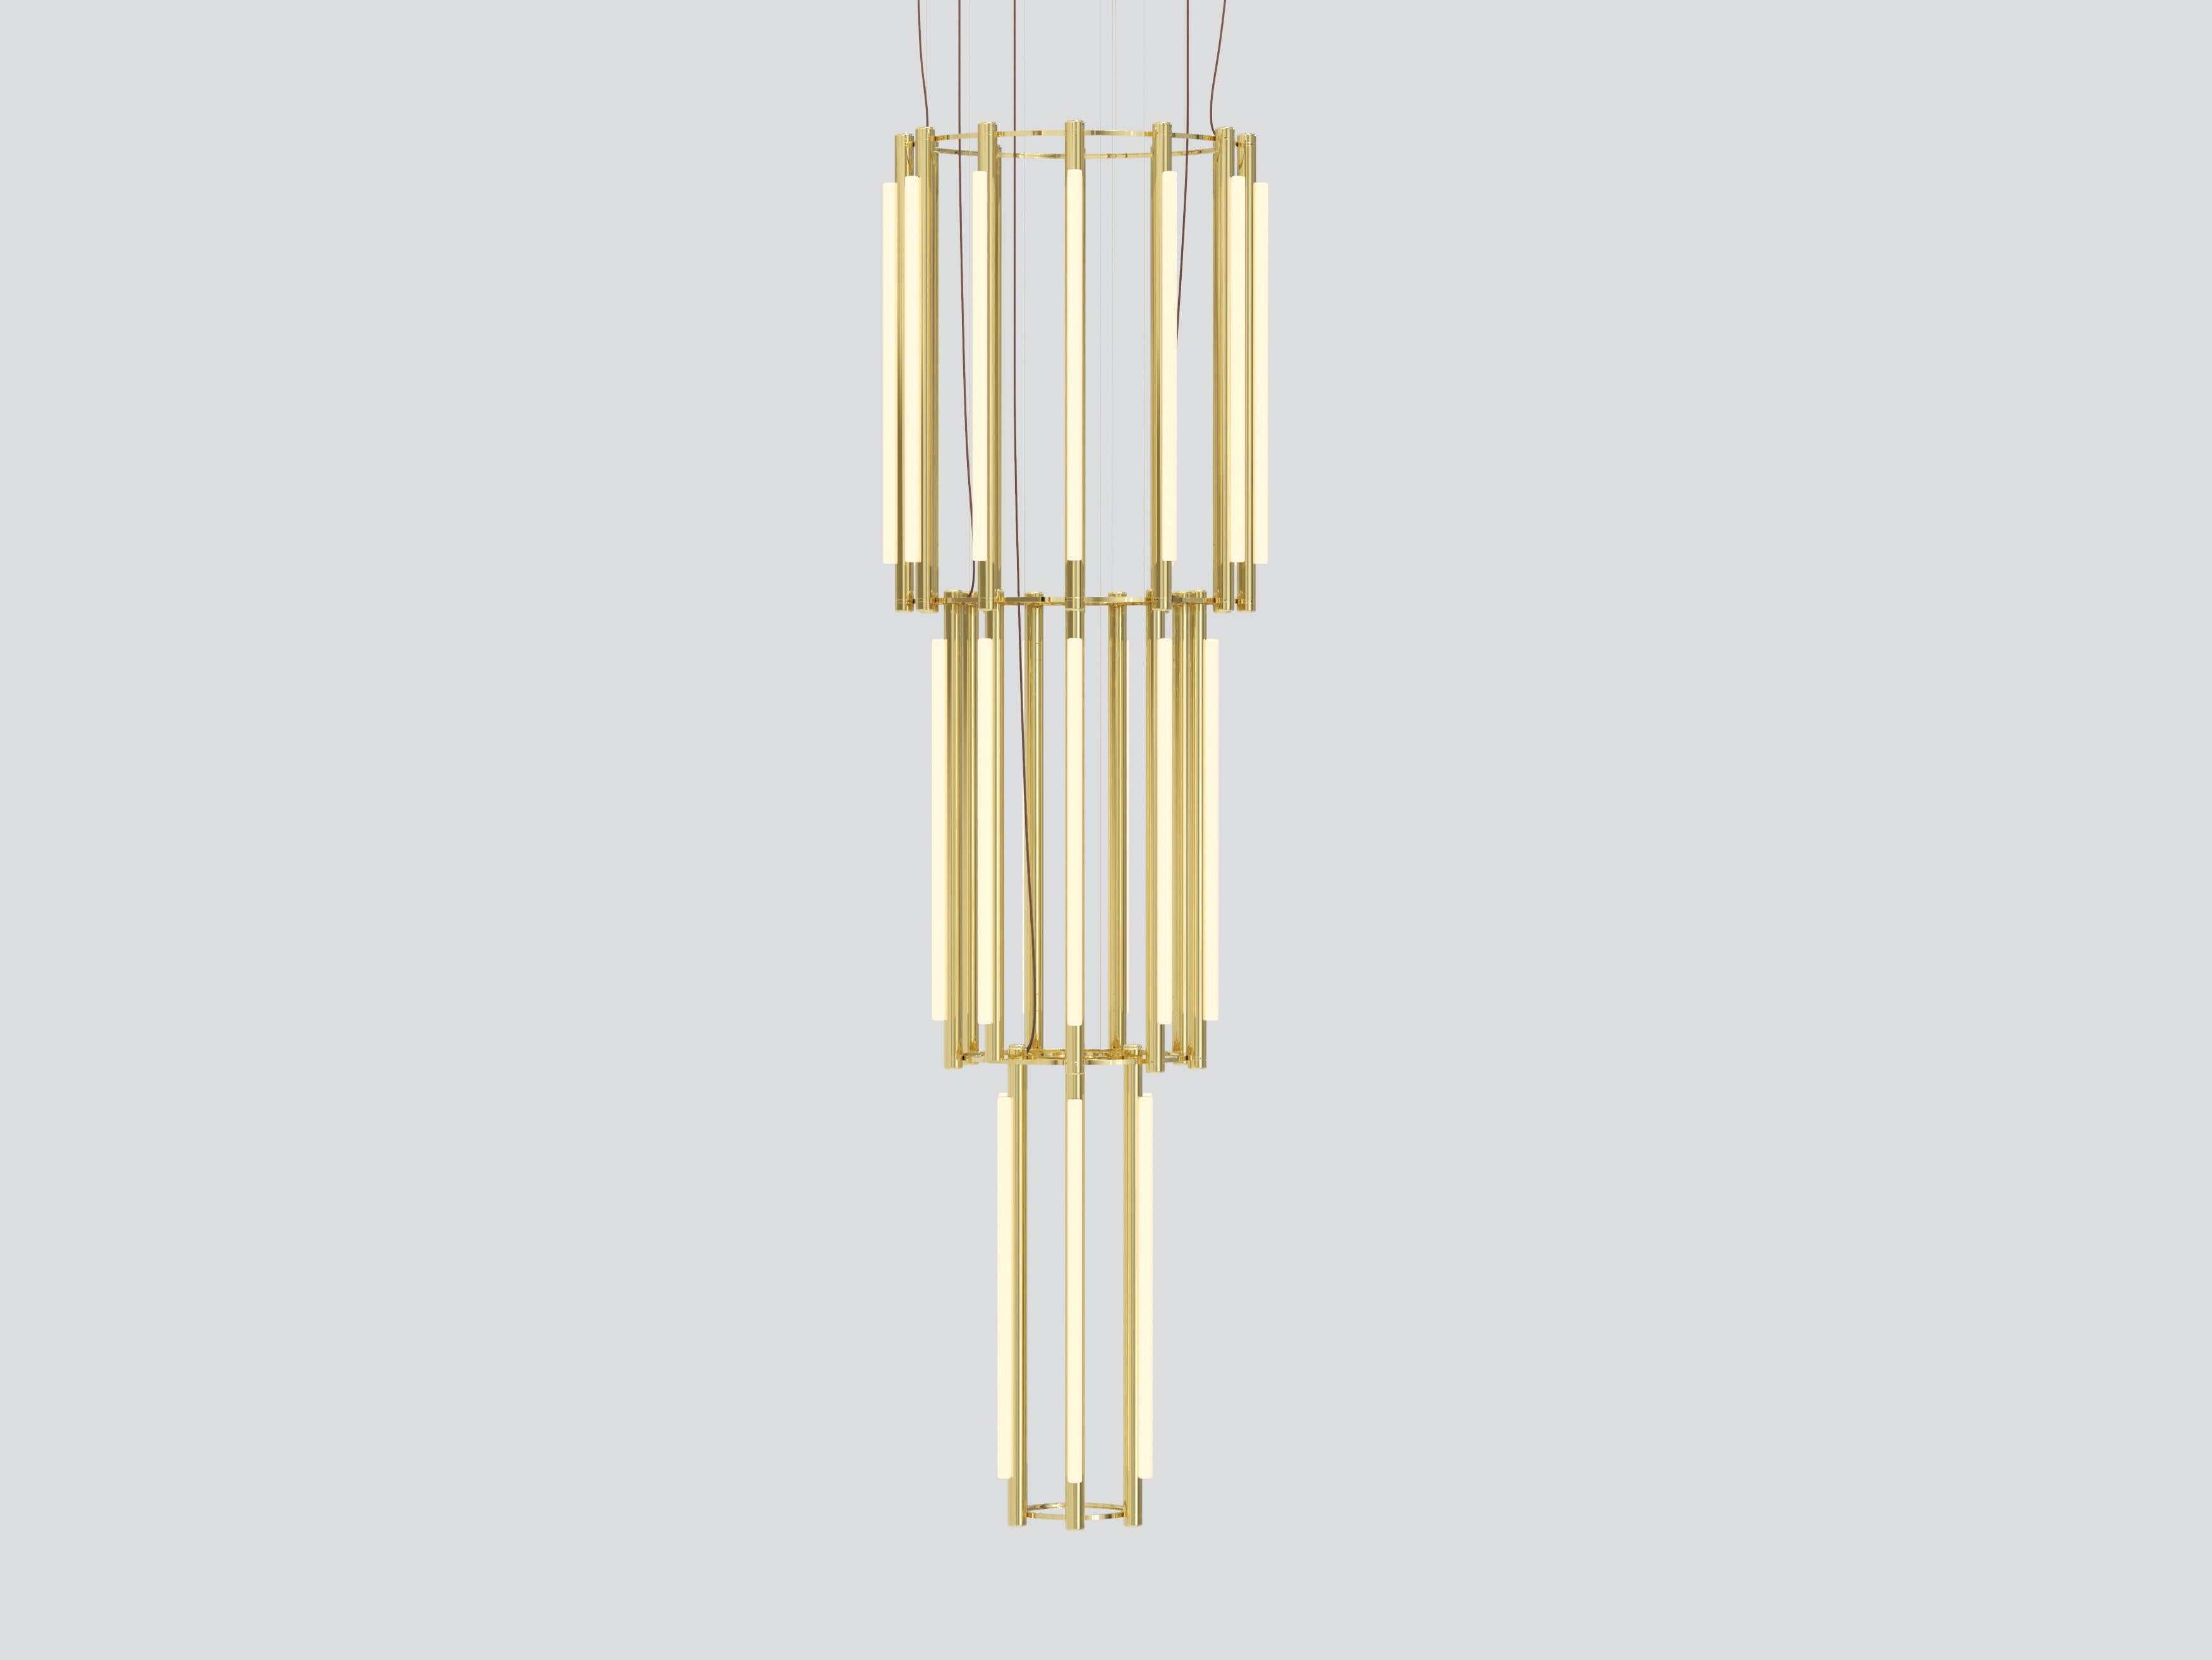 Pipeline chandelier 12 – pendant
by Caine Heintzman

Materials
– aluminum body
– cast acrylic

Electrical
– 27 x 15W LED
– 47,000 hour Lifetime
– 90+ CRI
– Input Voltage 100–240V + 277V
– Integral 24V DC power supply included
– Dimming